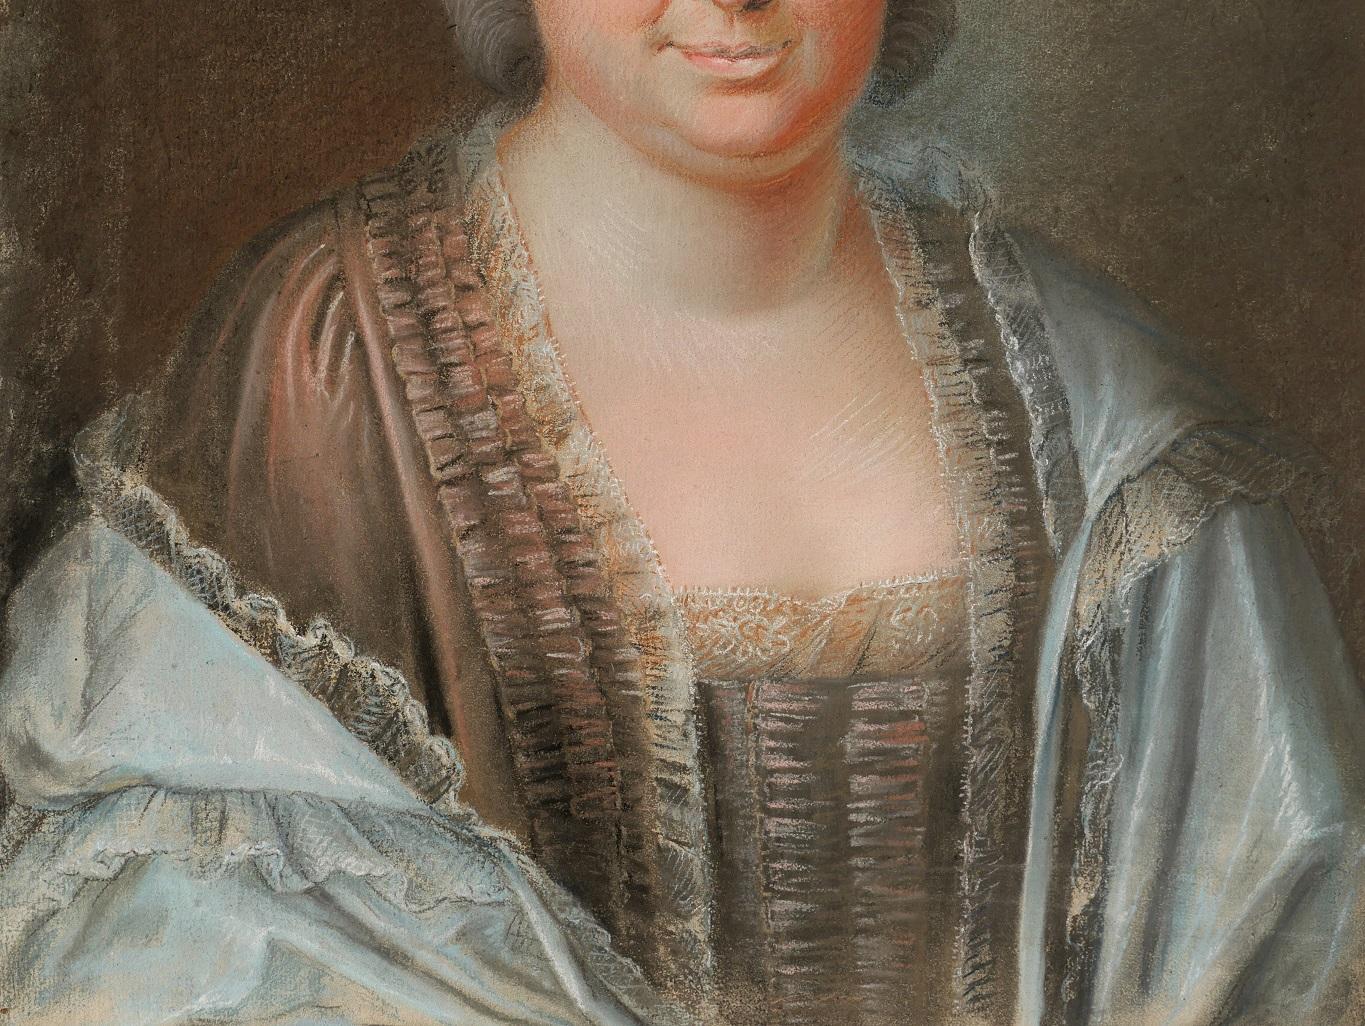 French School of the 18th century
Woman portrait
Pastel on paper mounted on canvas
Pastel: 46.5 x 63 cm (18.3 x 24.8 inches)
Frame: 57 x 71 cm (22.4 x 28 inches)
Very good condition
Circa 1770-80

The pastel is on paper mounted on canvas and mounted